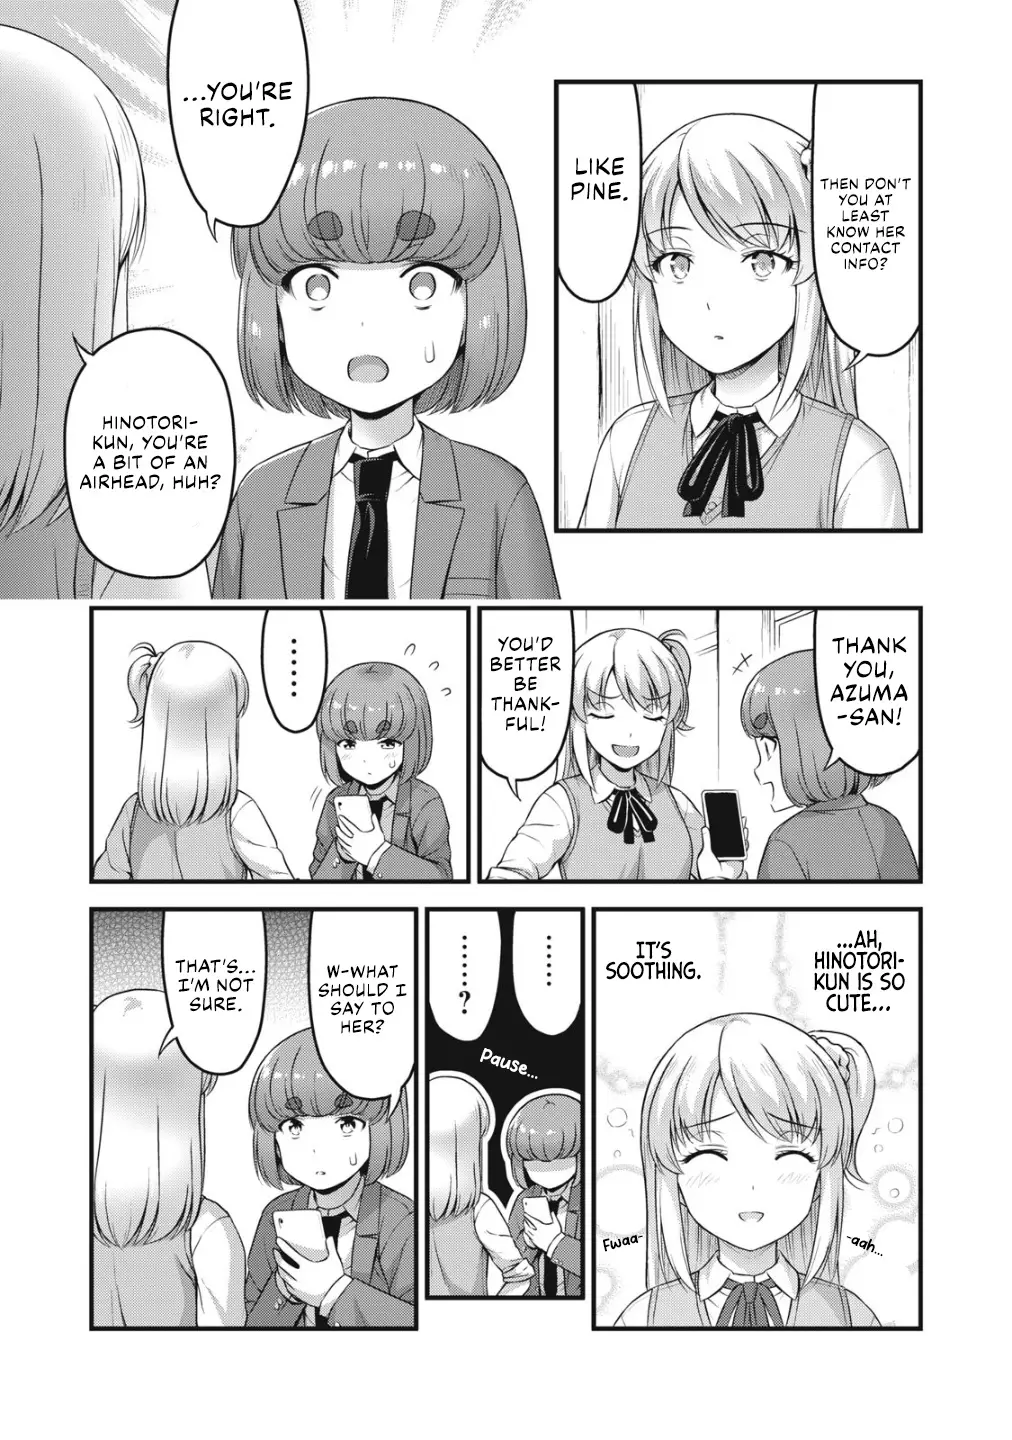 Queen's Seed - 1 page 11-9379260c